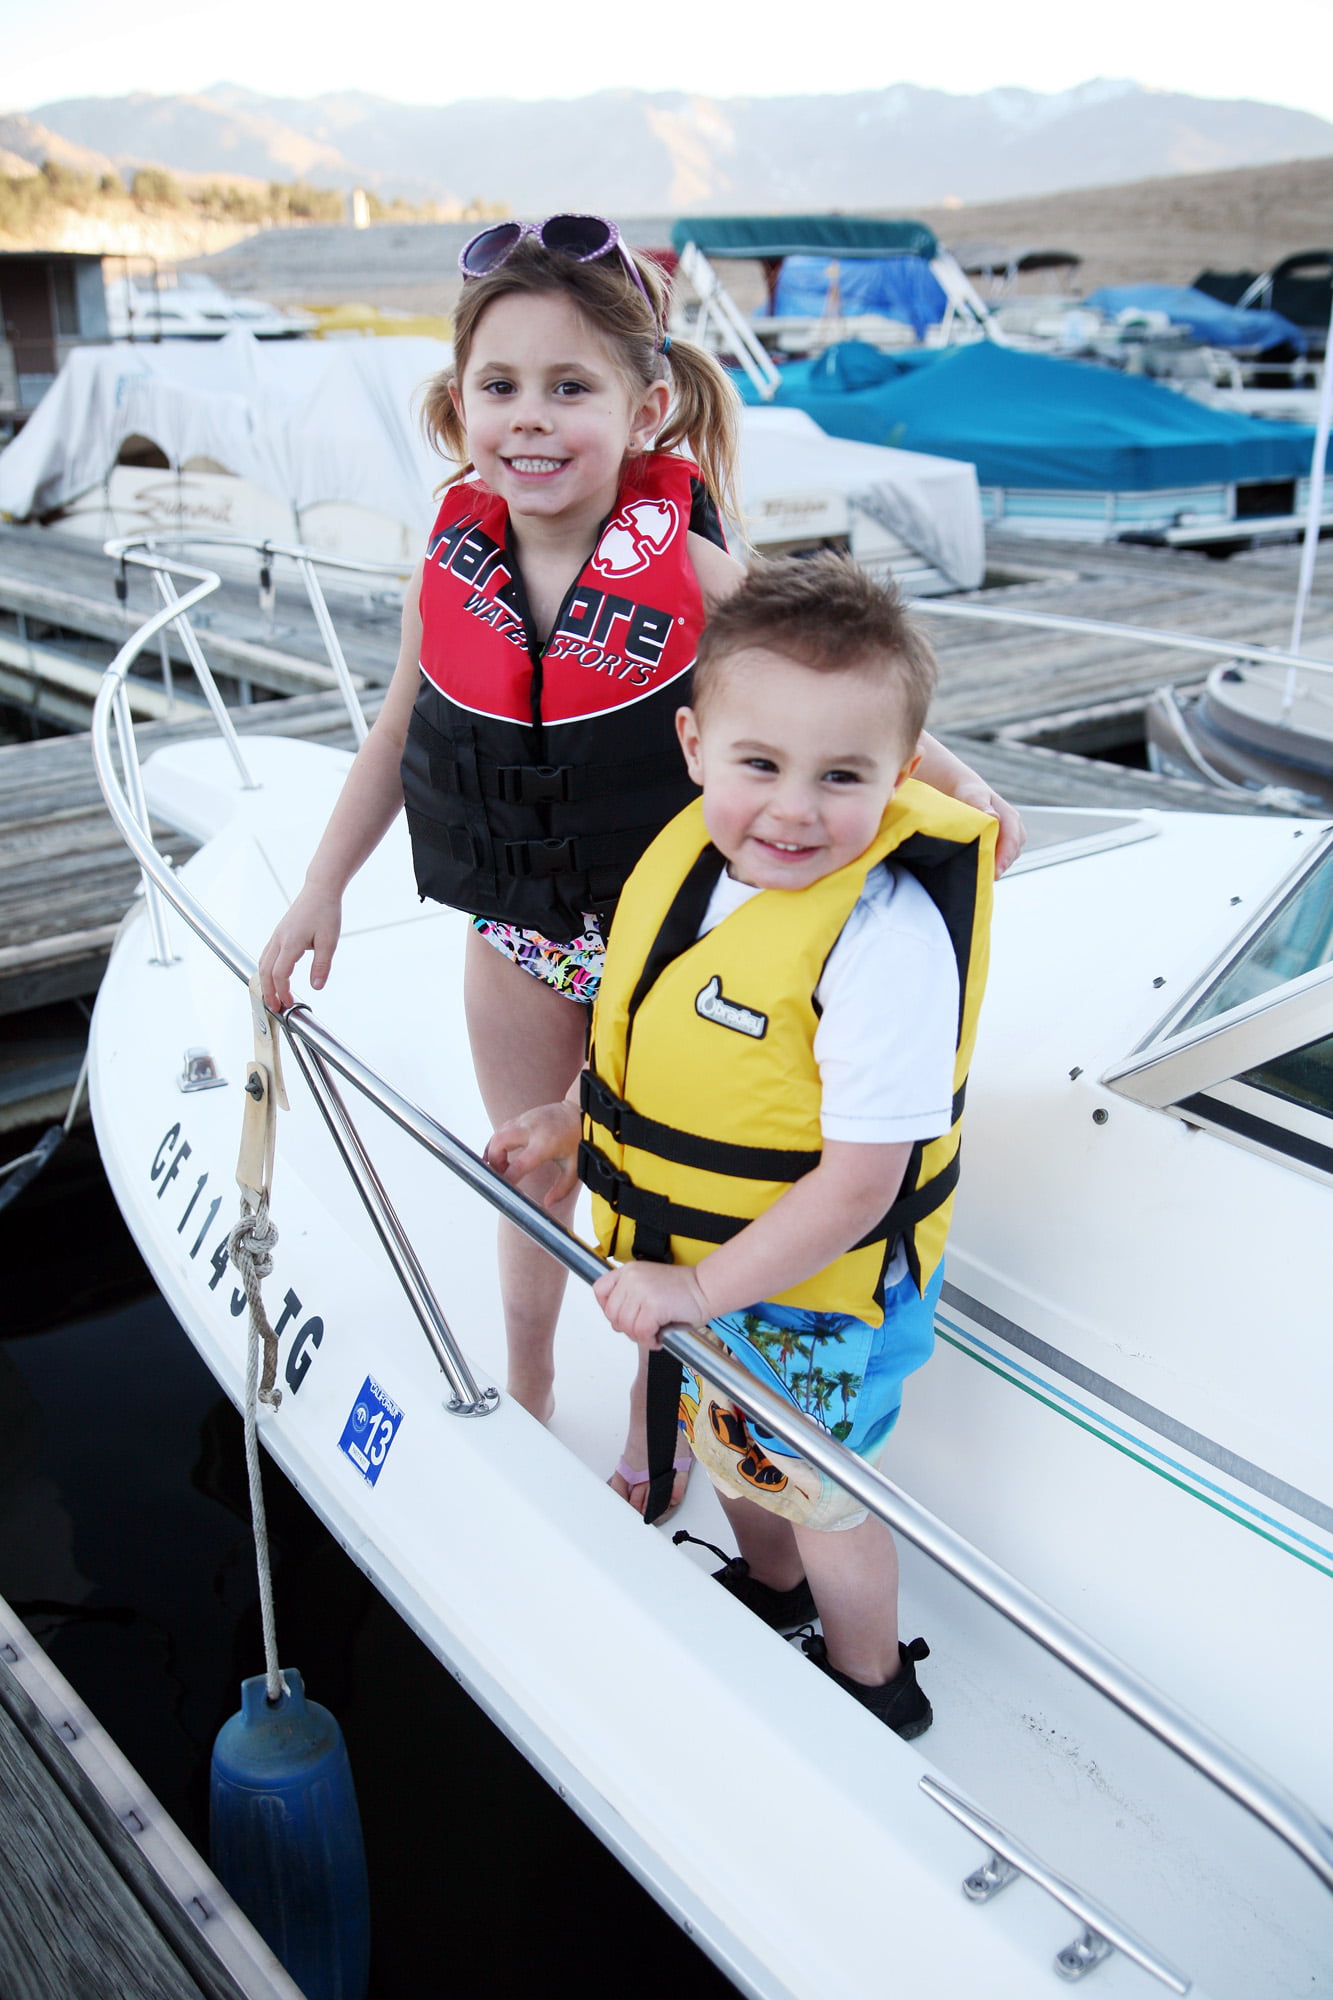 Life Jacket Vests For The Entire Family, Child, Youth